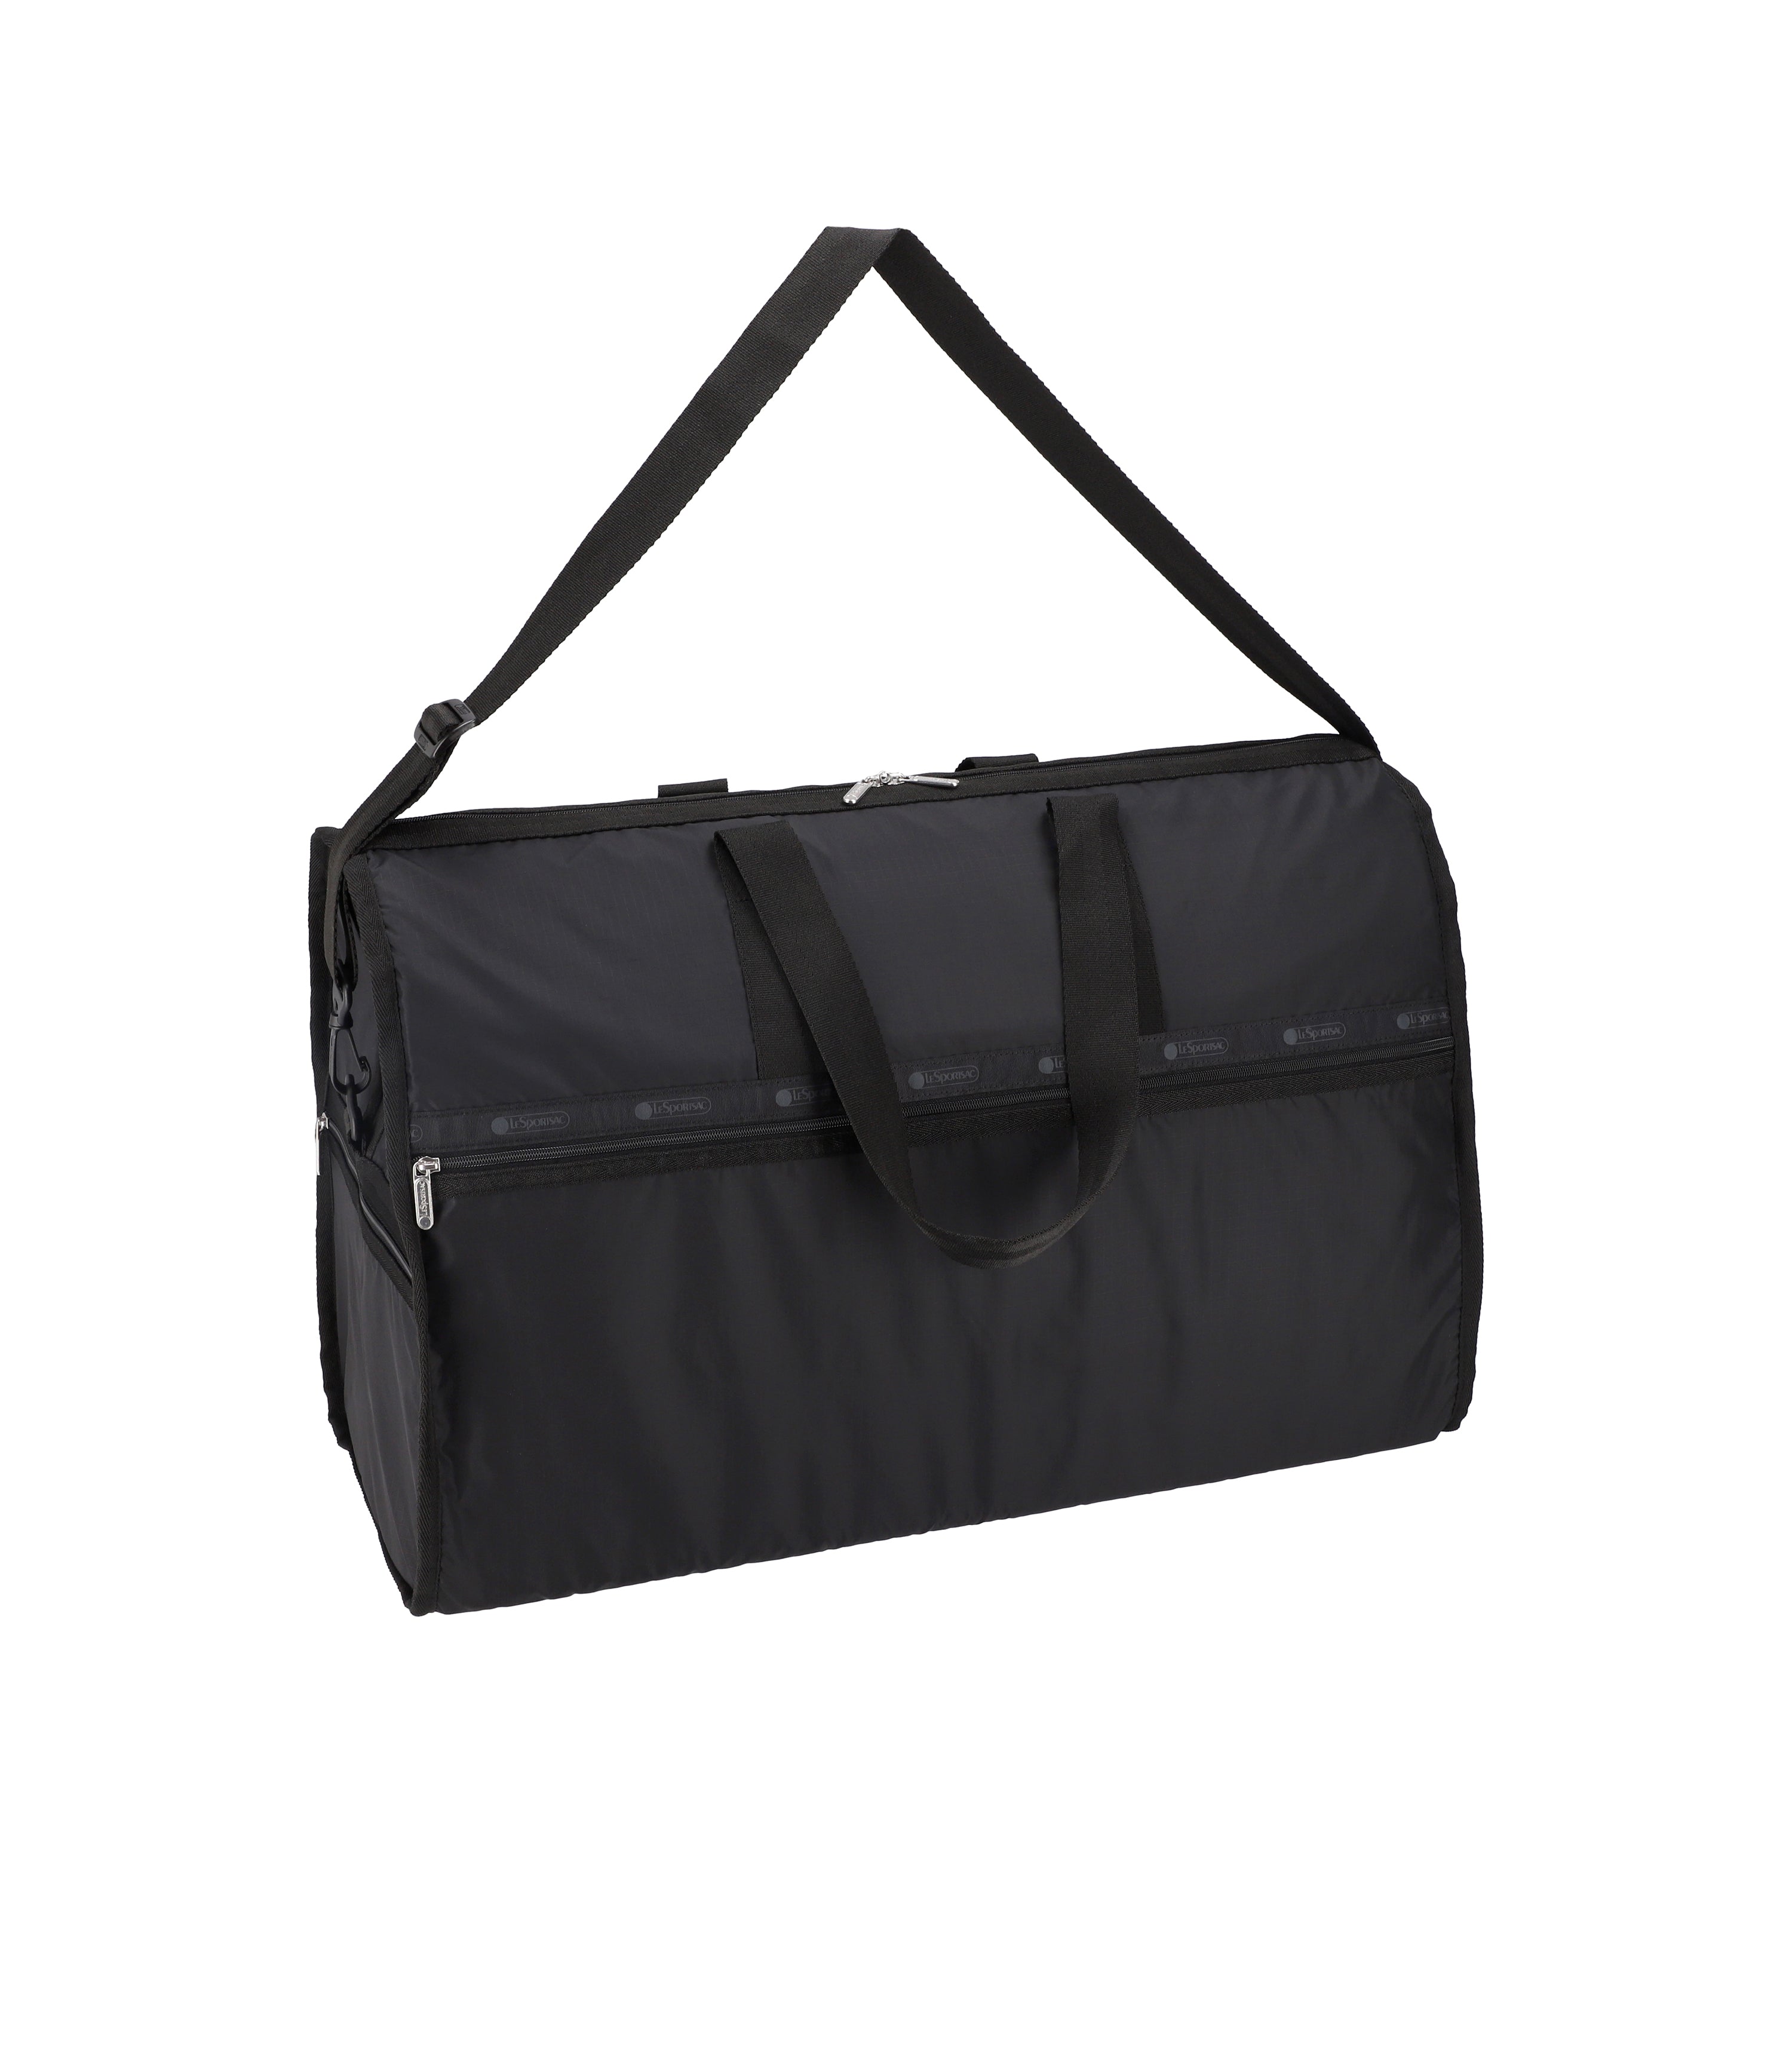 Deluxe Extra Large Weekender - Black solid – LeSportsac